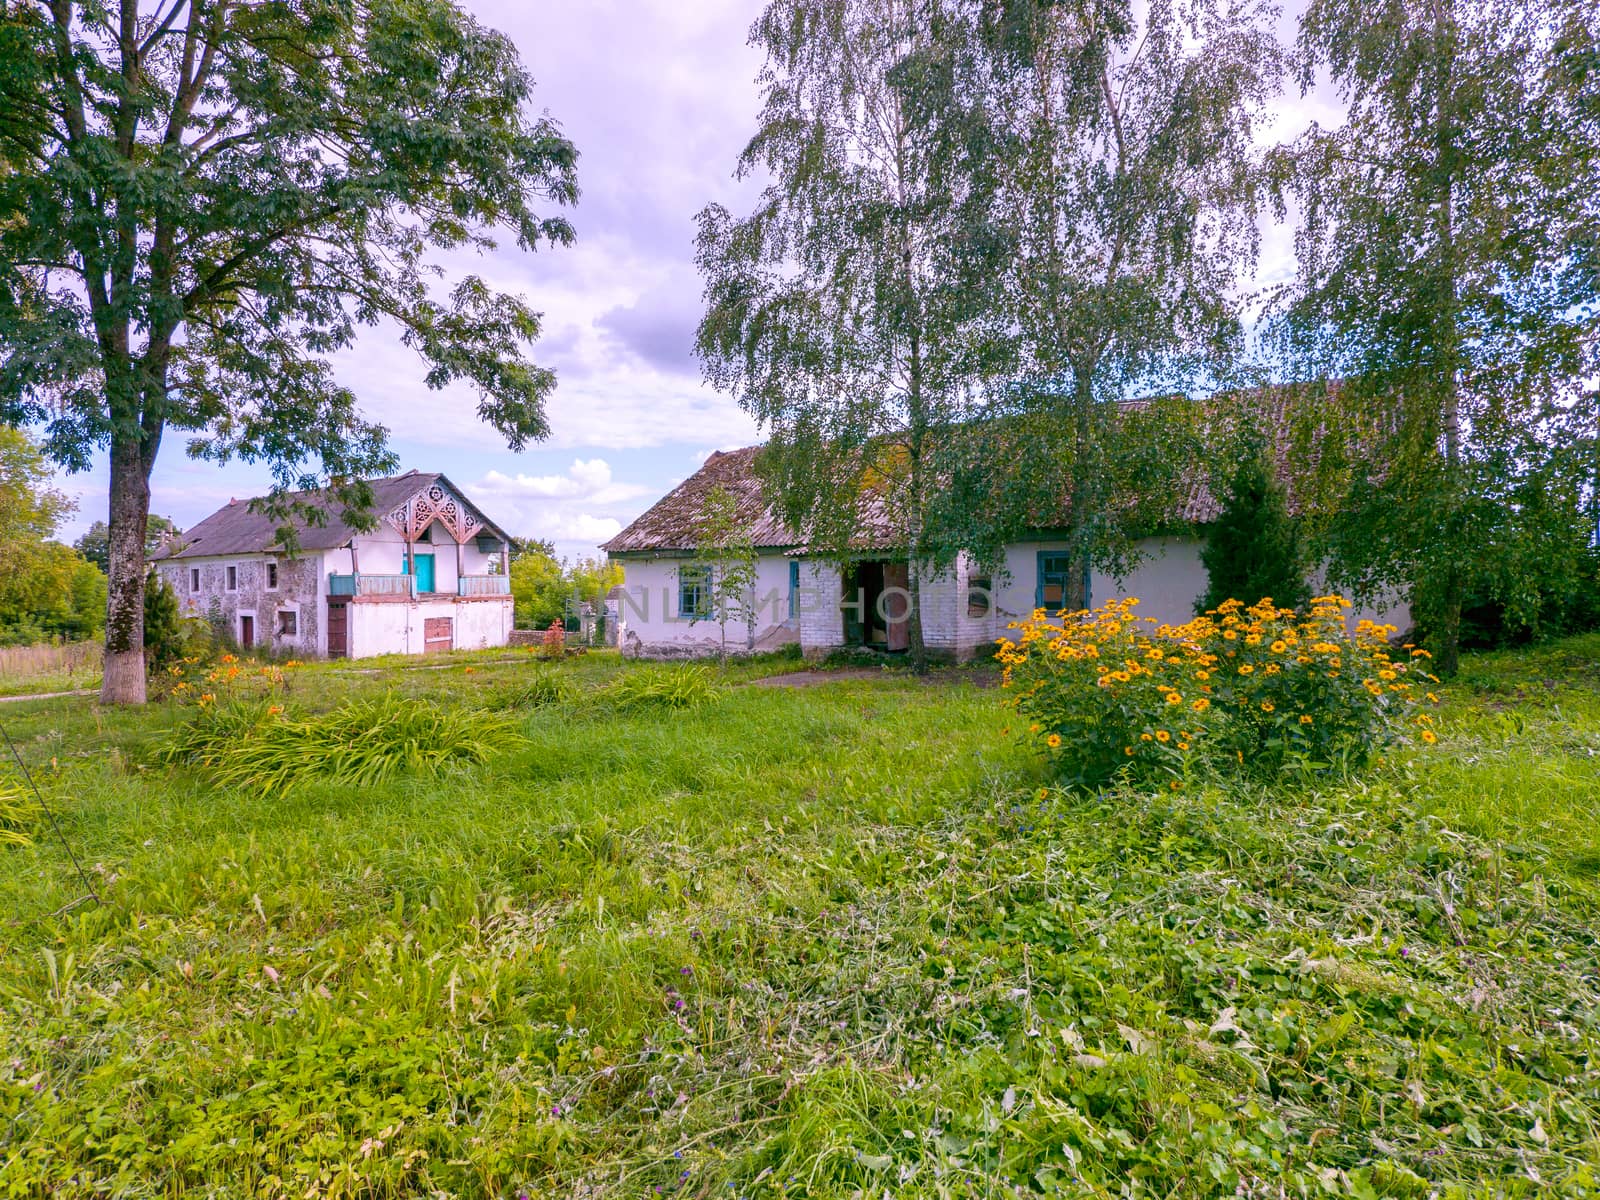 Old buildings in the countryside with a slate roof overgrown with moss with a yard with green grass and a bush of yellow beautiful flowers.